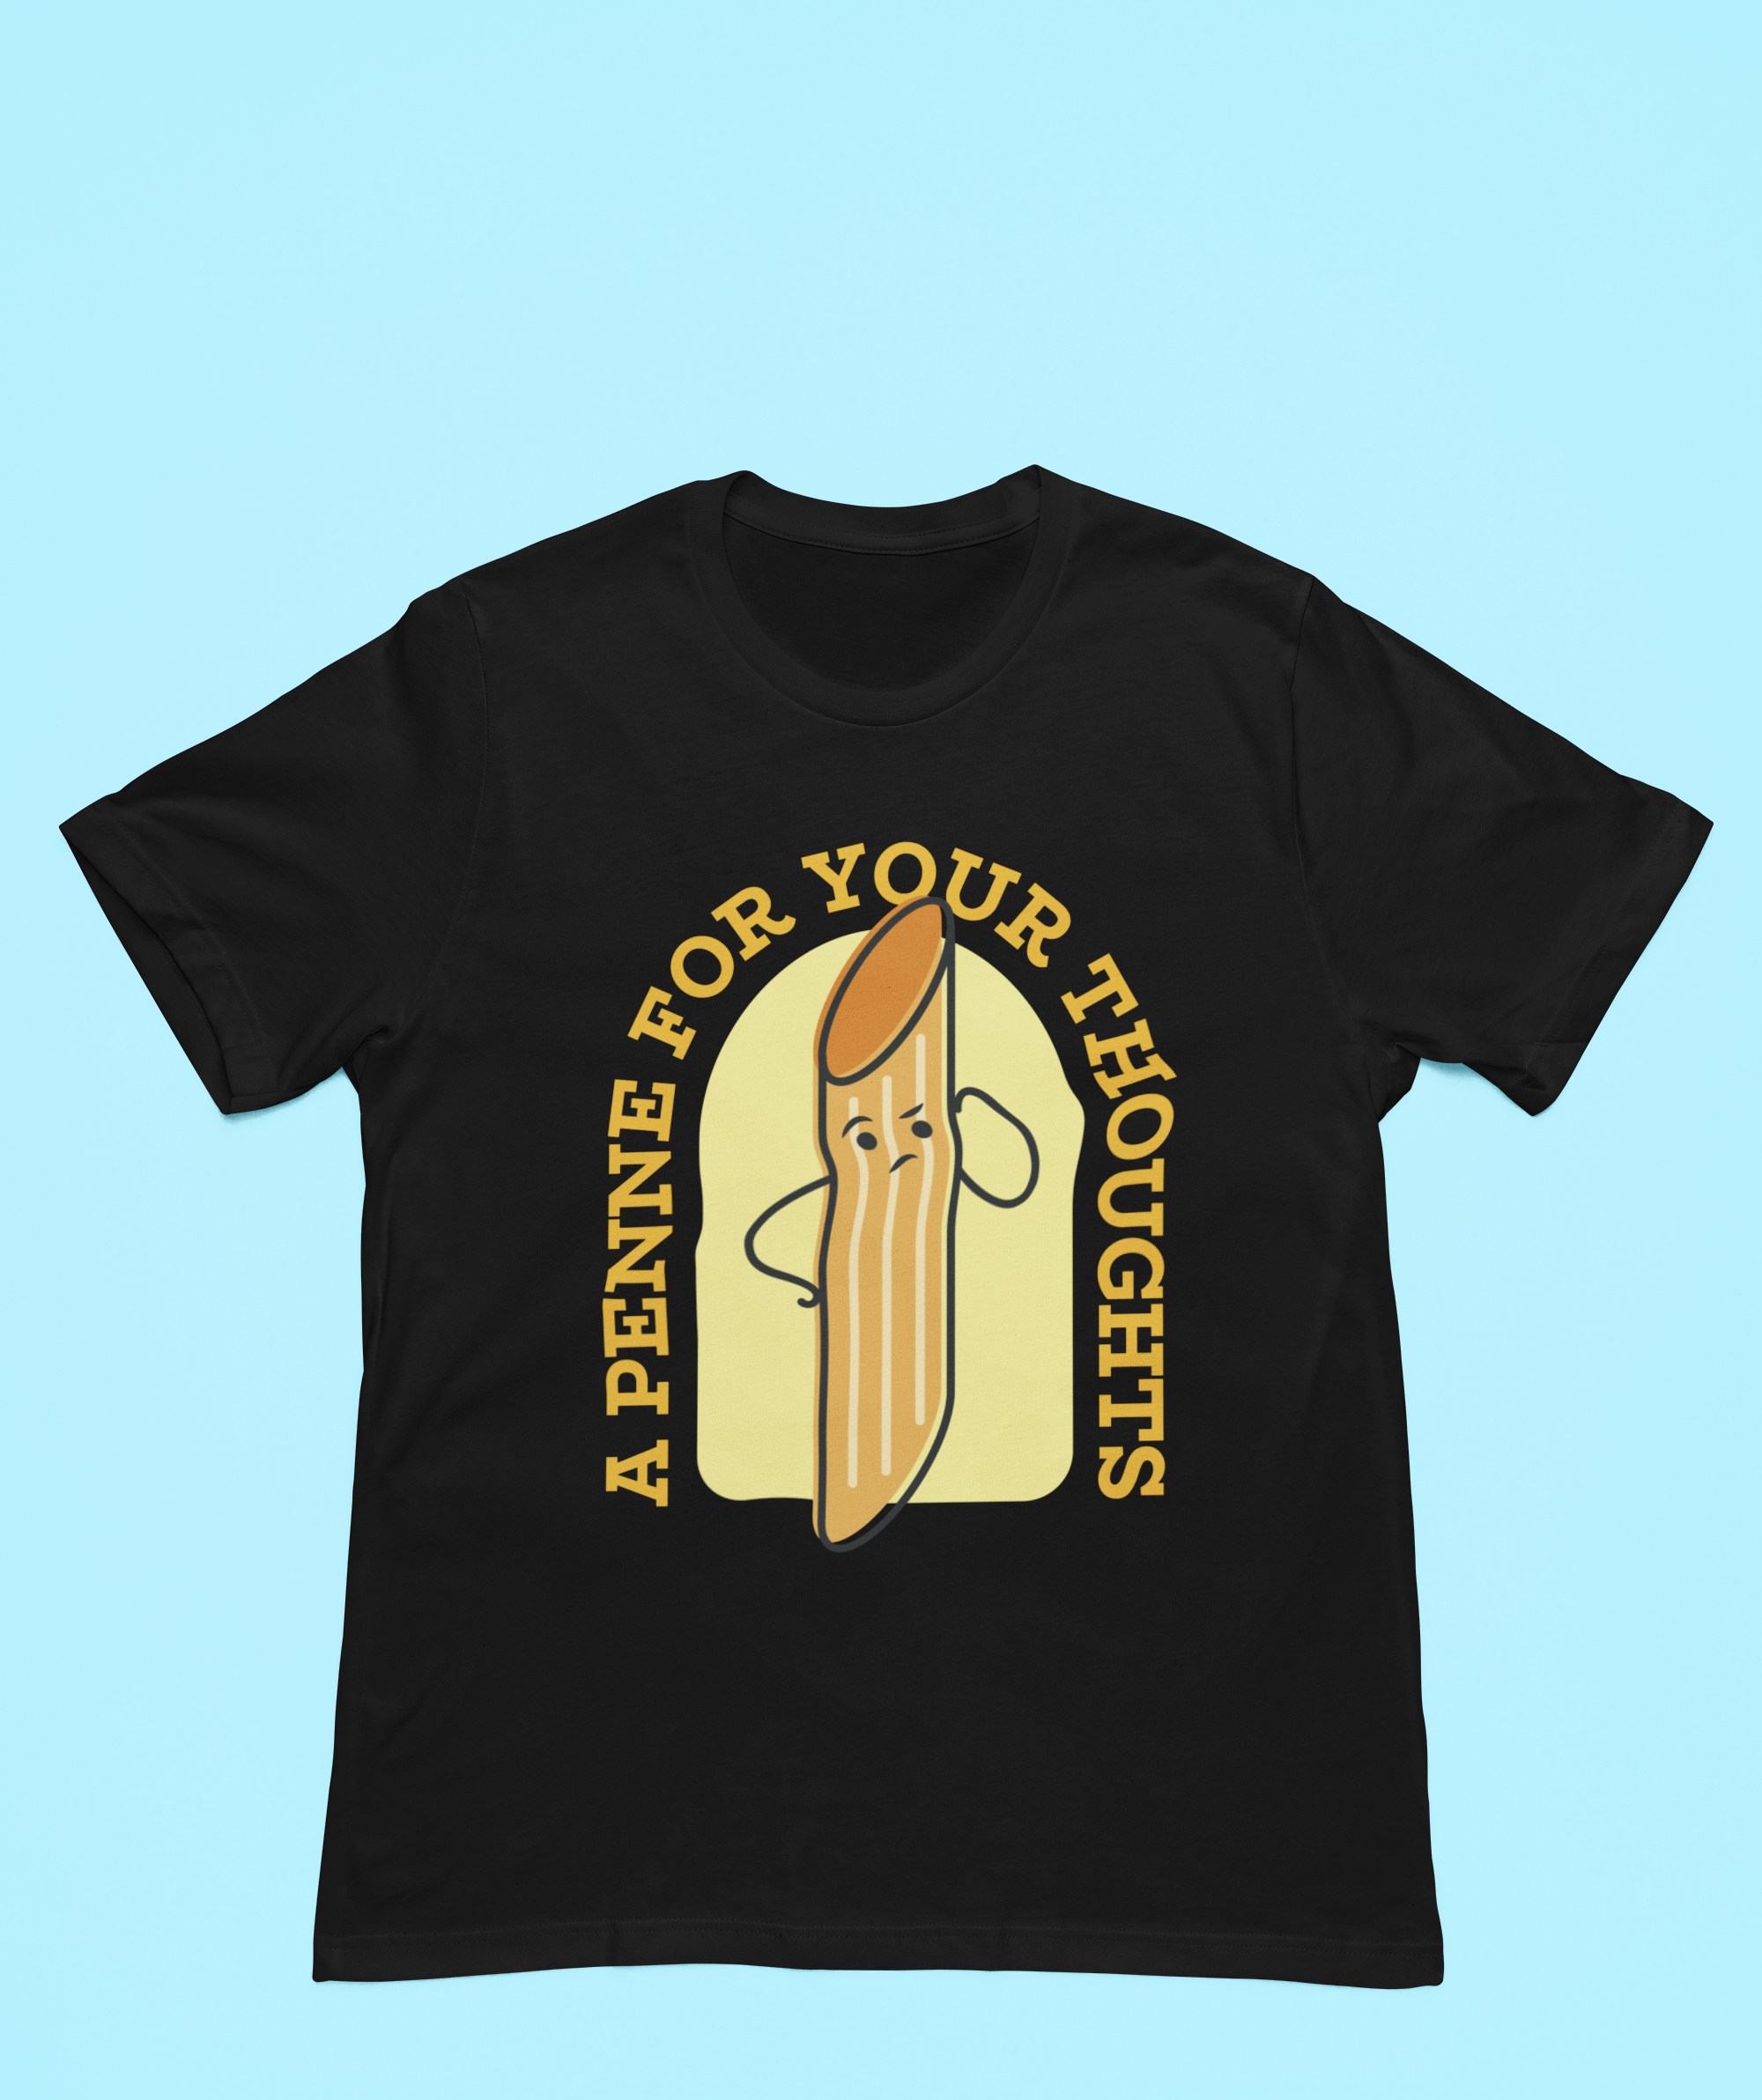 A Penne for your thoughts T-shirt